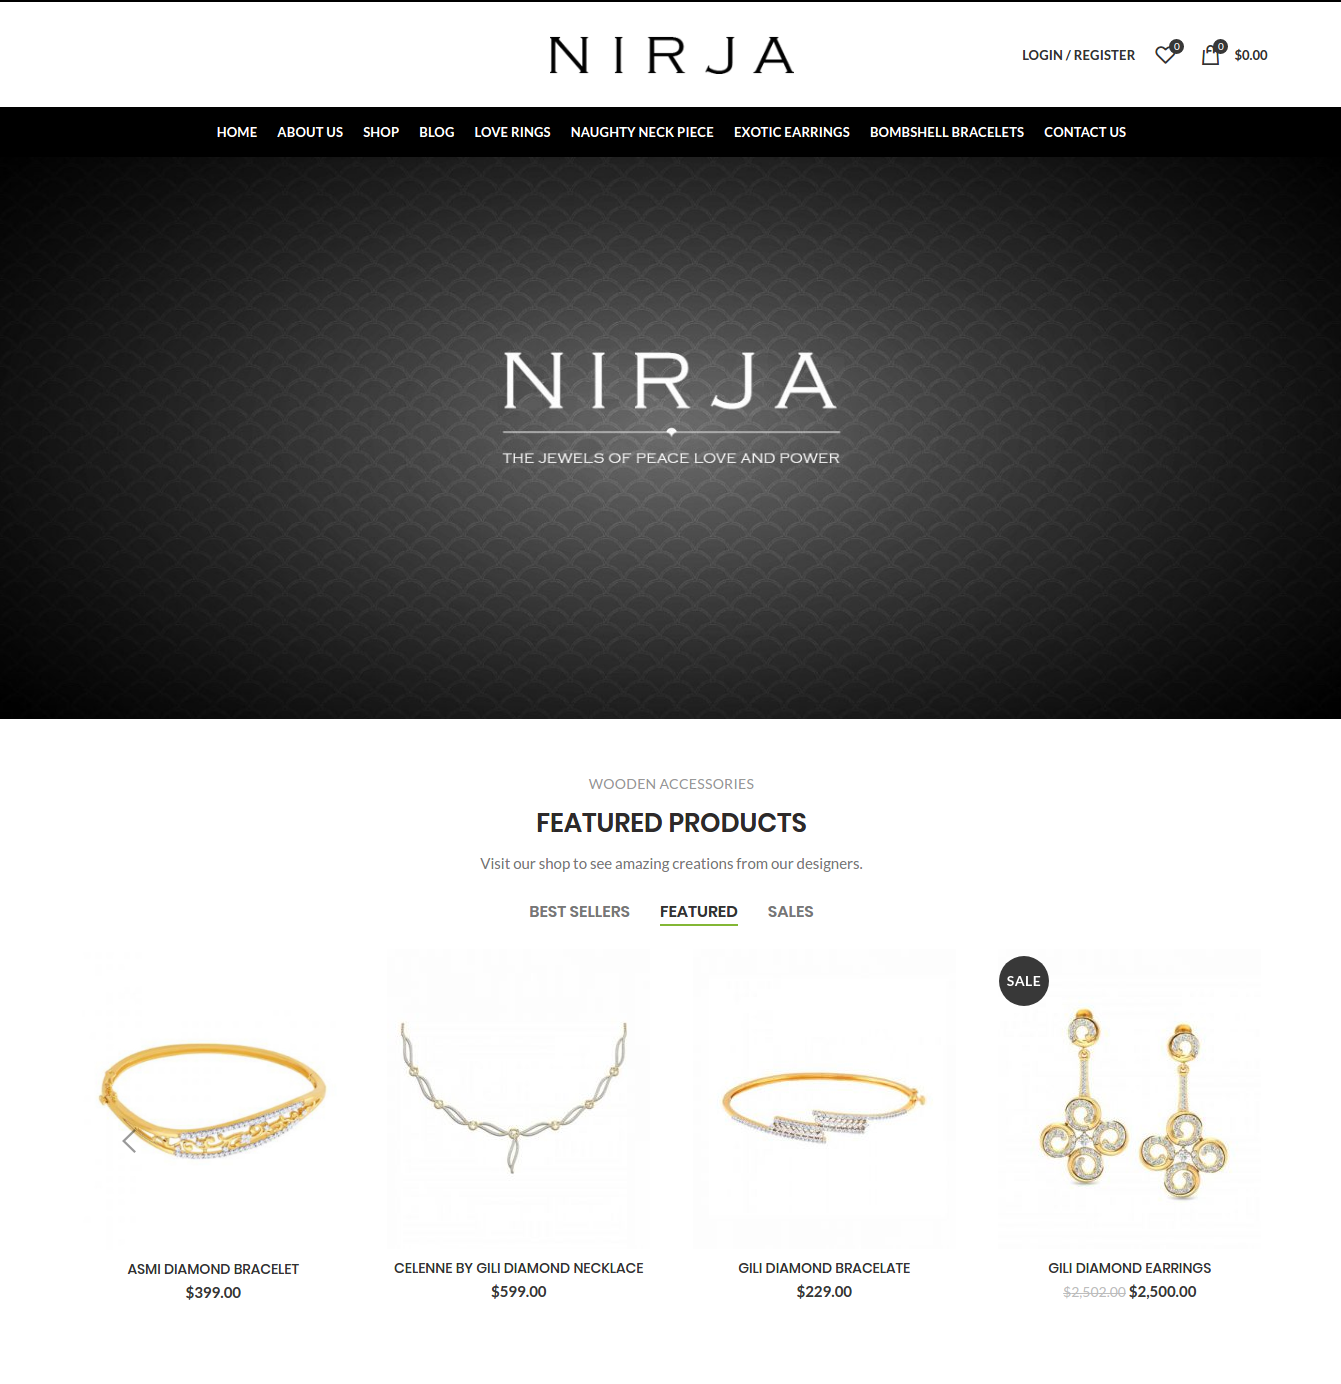 IMPORTANCE OF UX DESIGN FOR JEWELLERY WEBSITES